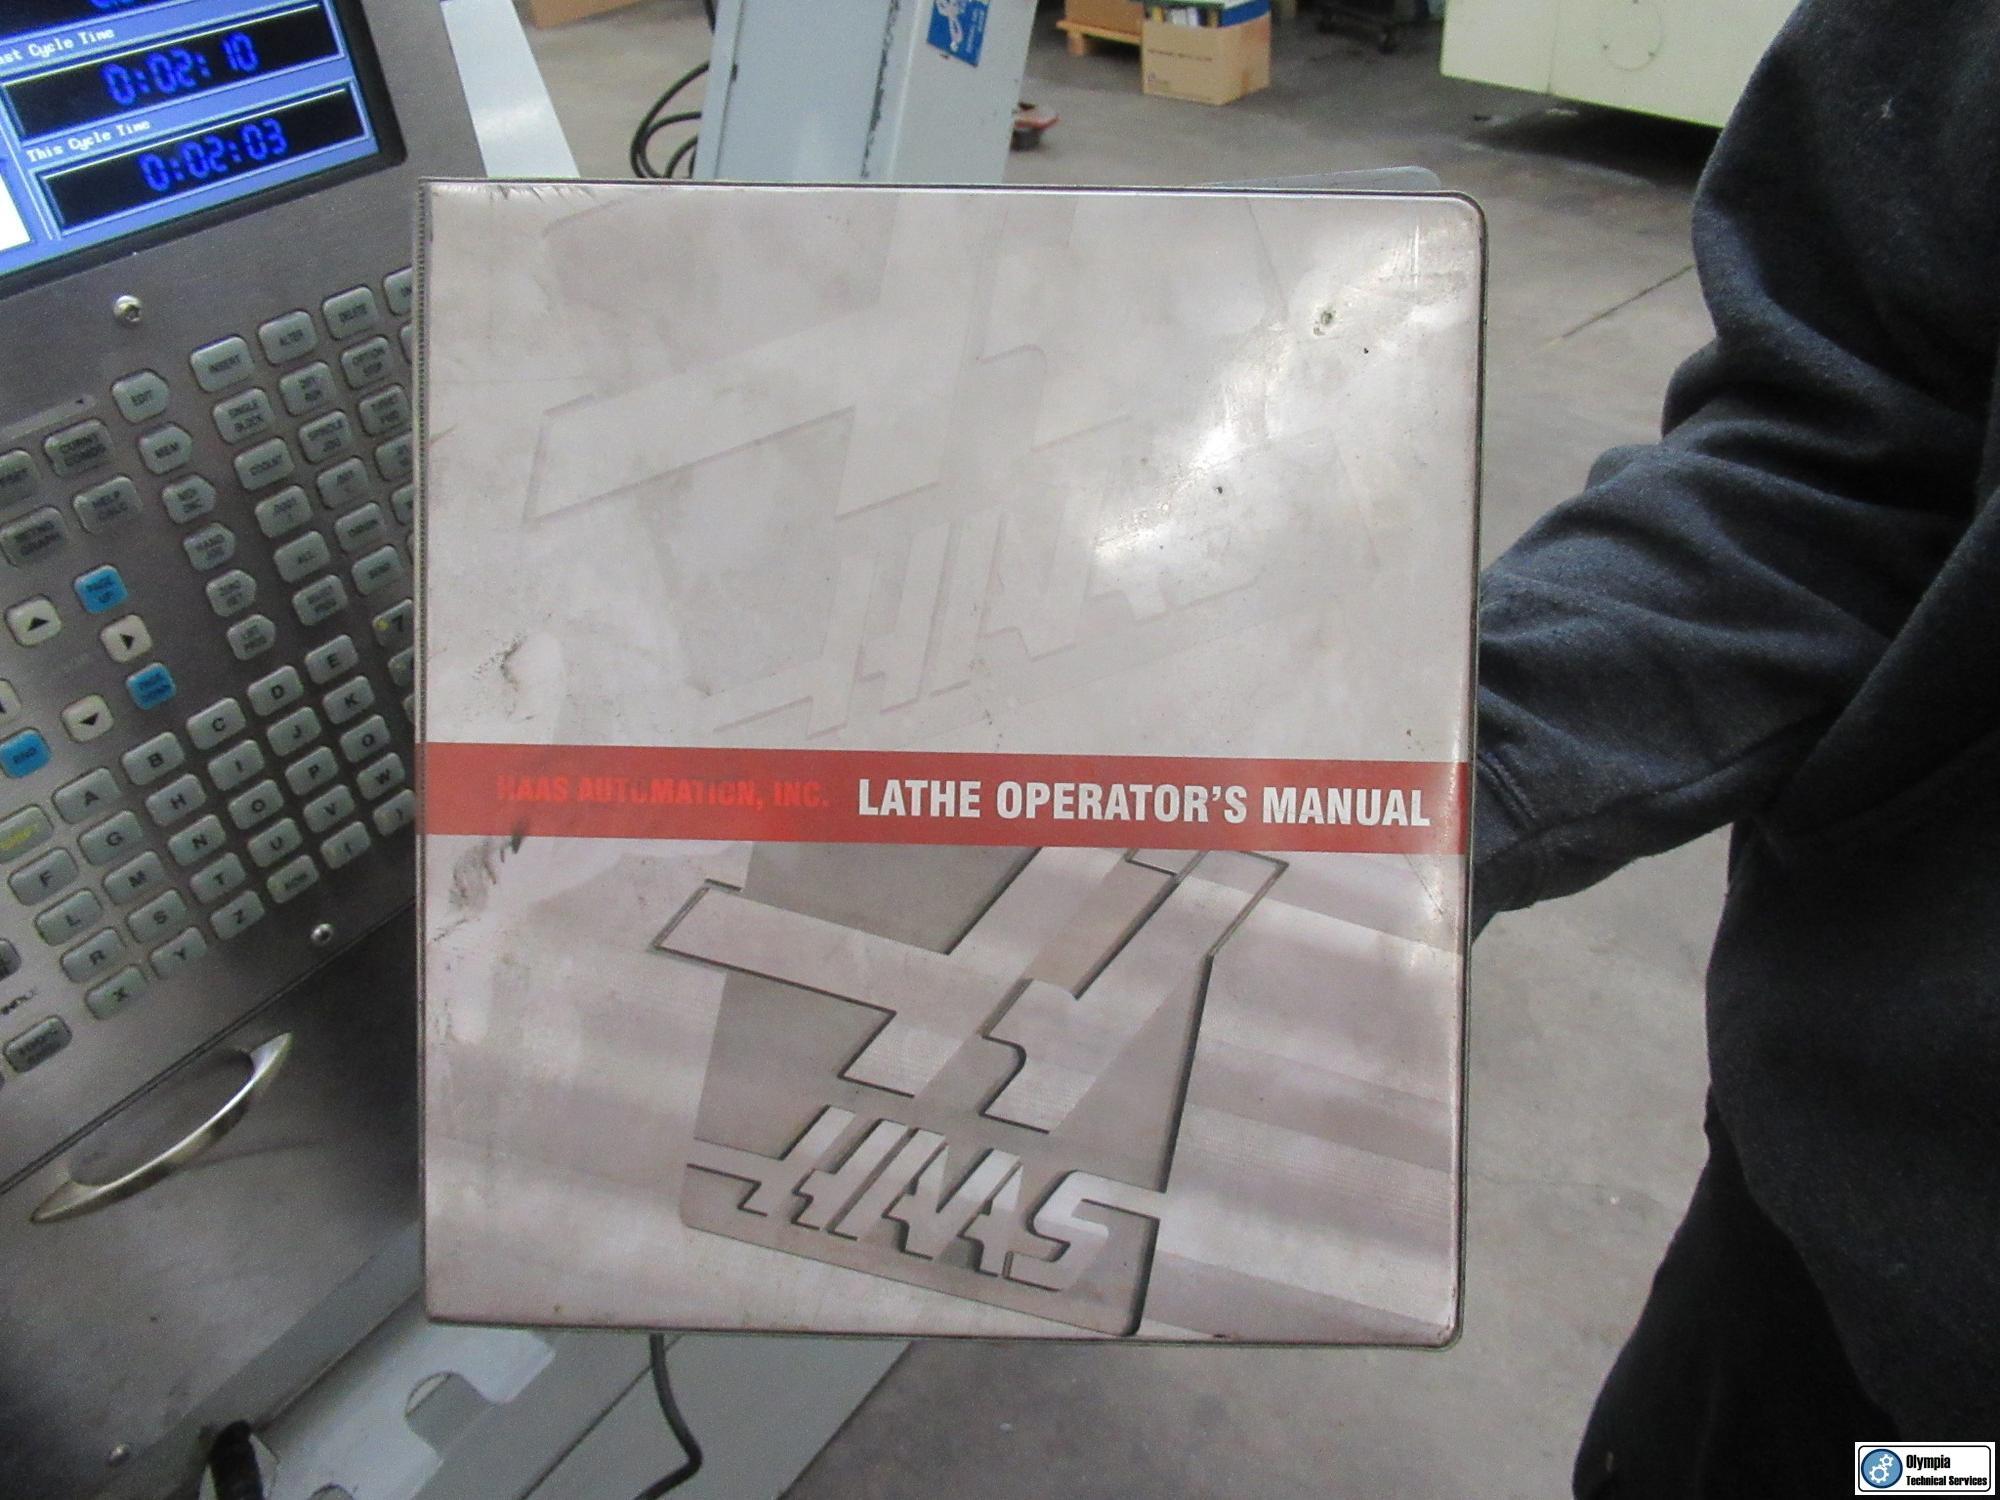 2008 HAAS SL-20 CNC Lathes | Olympia Technical Services